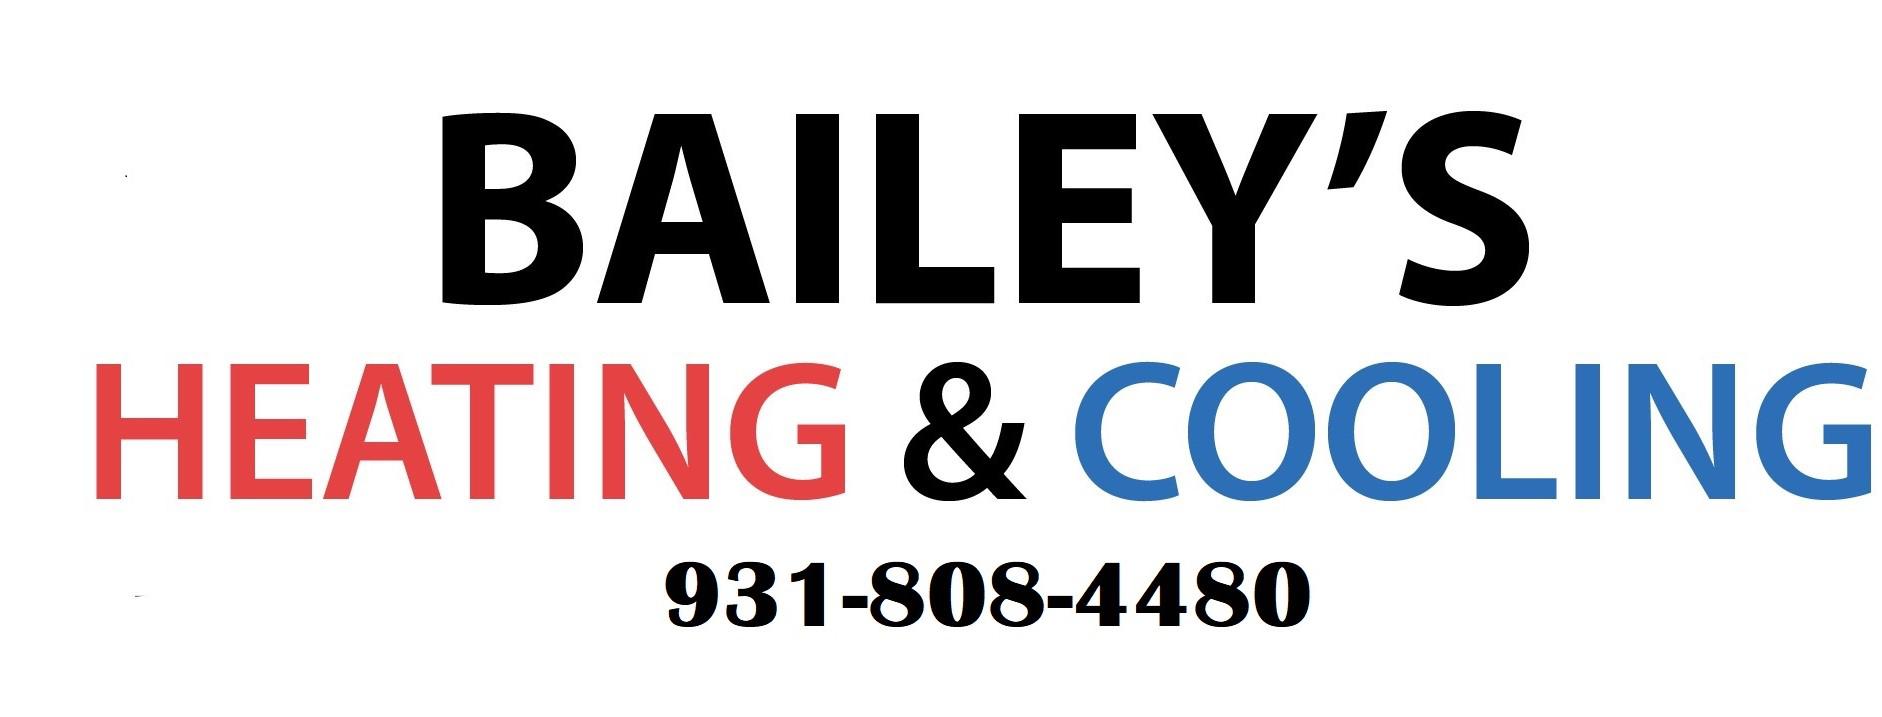 Bailey's Heating and Cooling - Sparta, TN 38583 - (931)739-2097 | ShowMeLocal.com